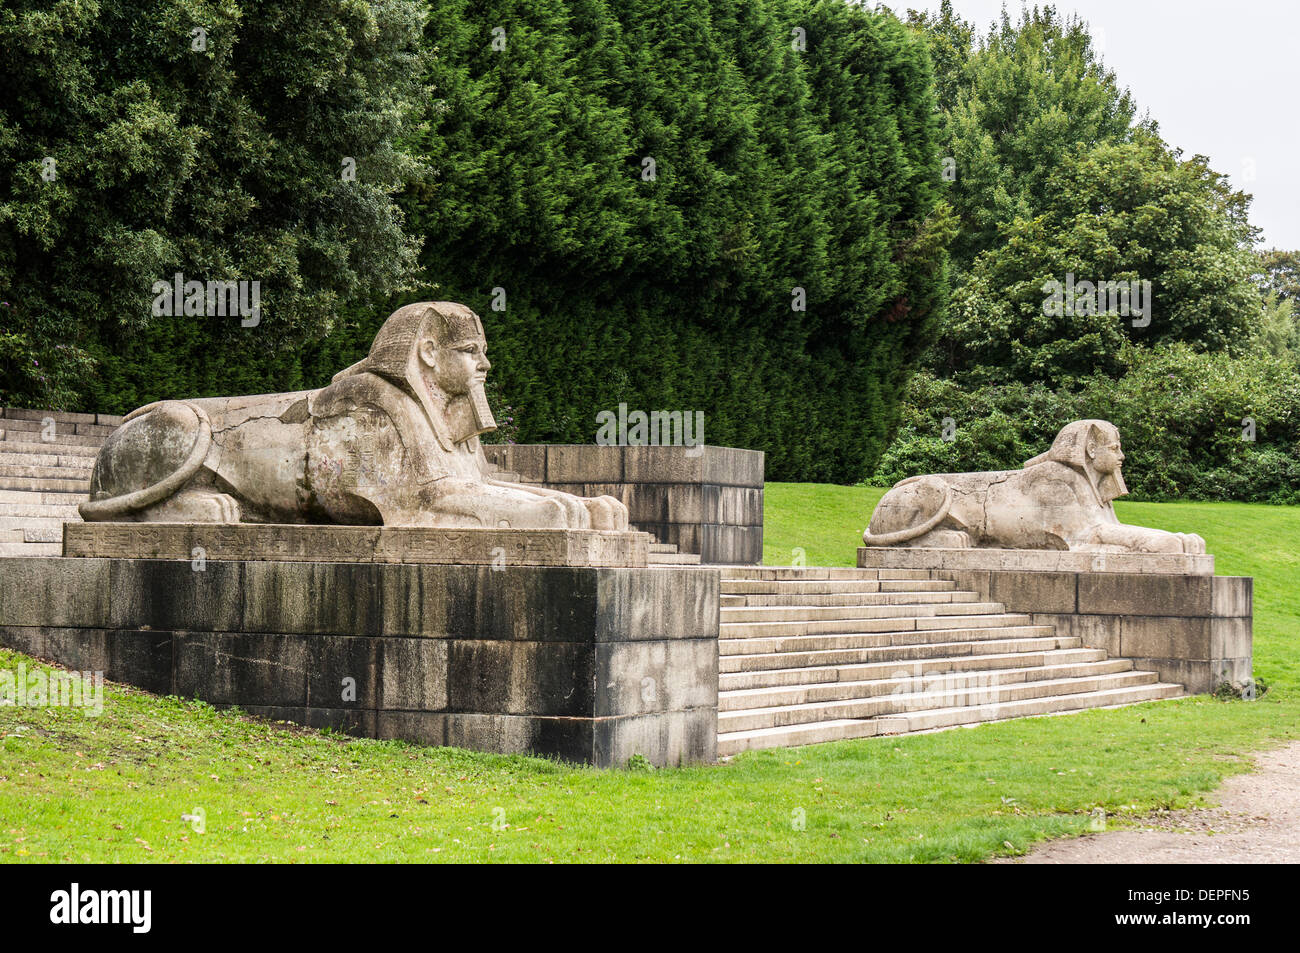 Stone sphinx statues, Crystal Palace park, London, England. Stock Photo